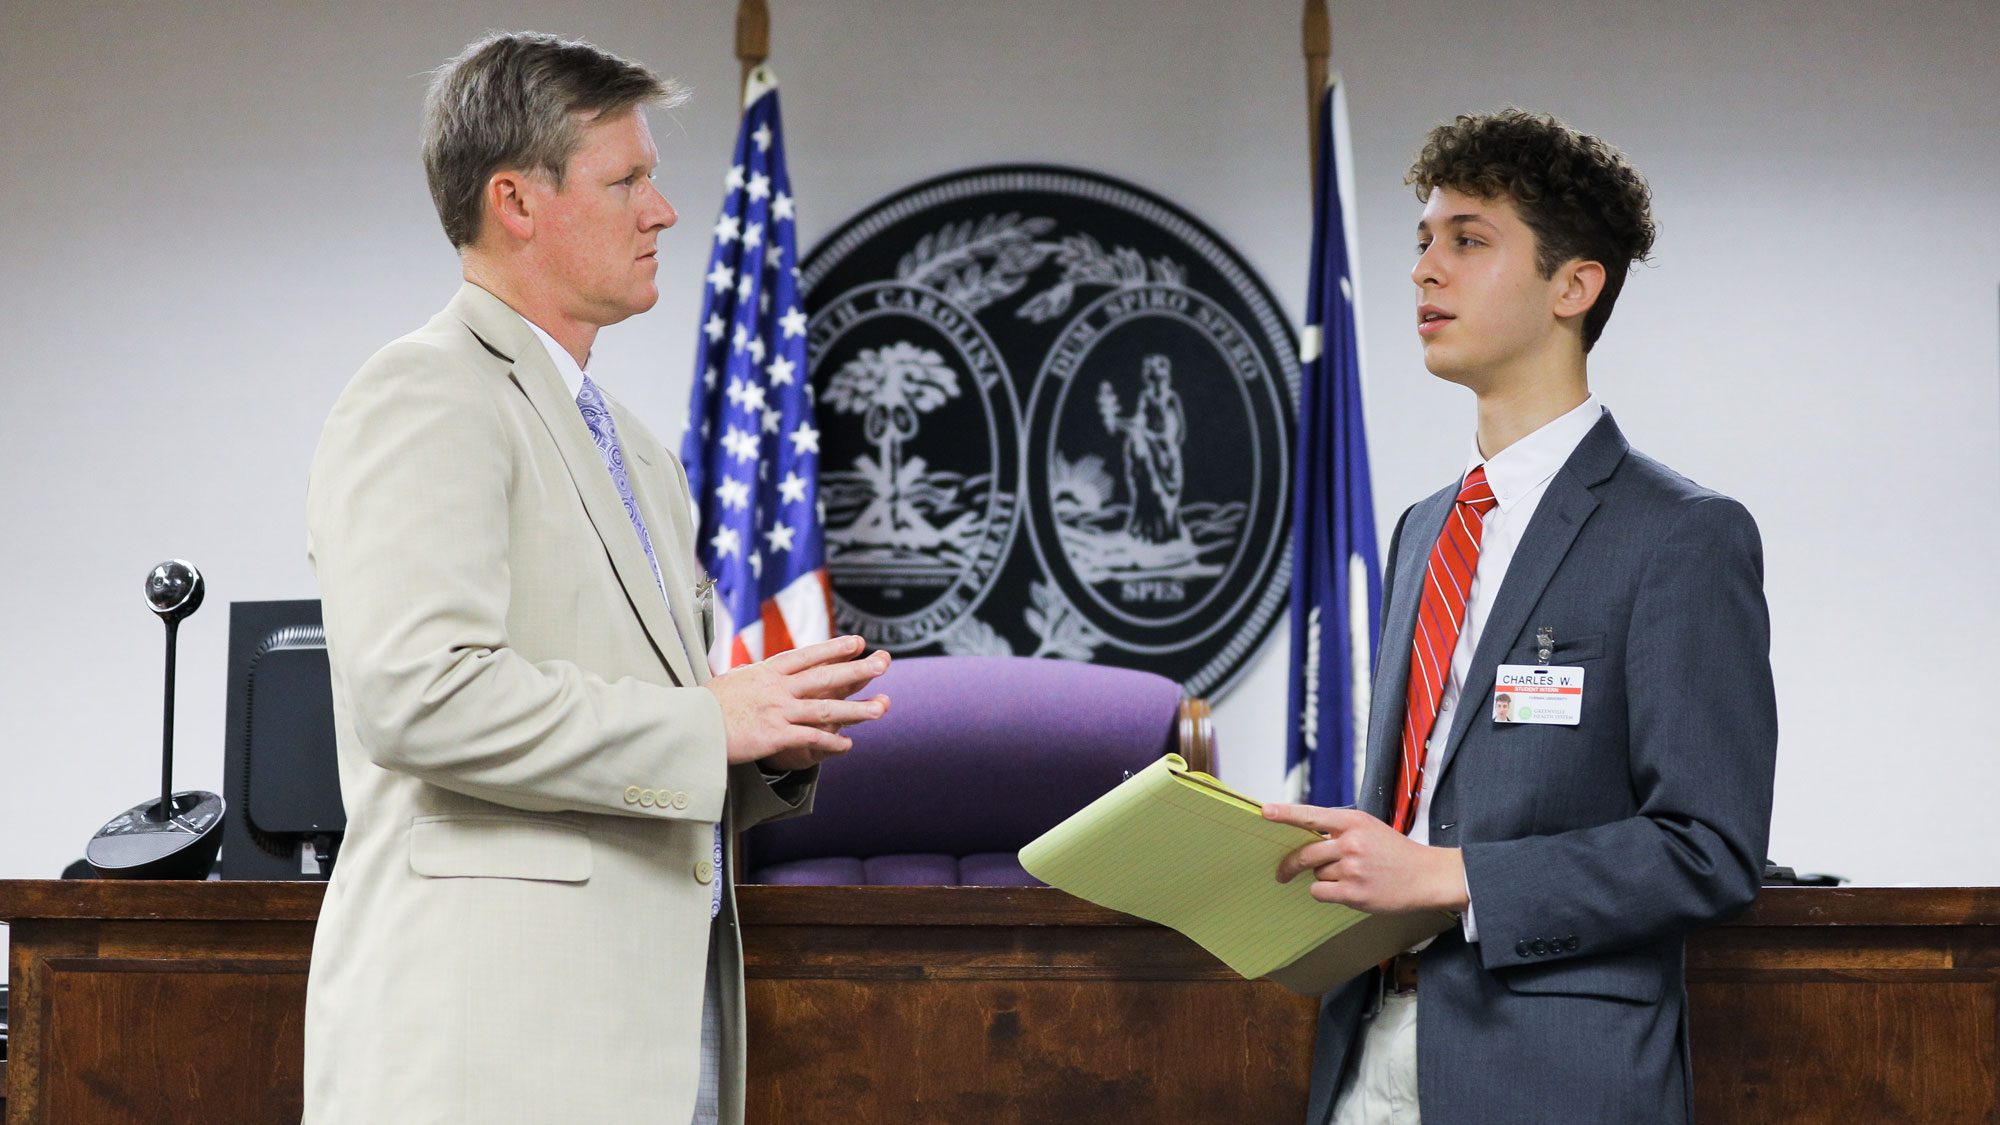 Student speaking to a lawyer